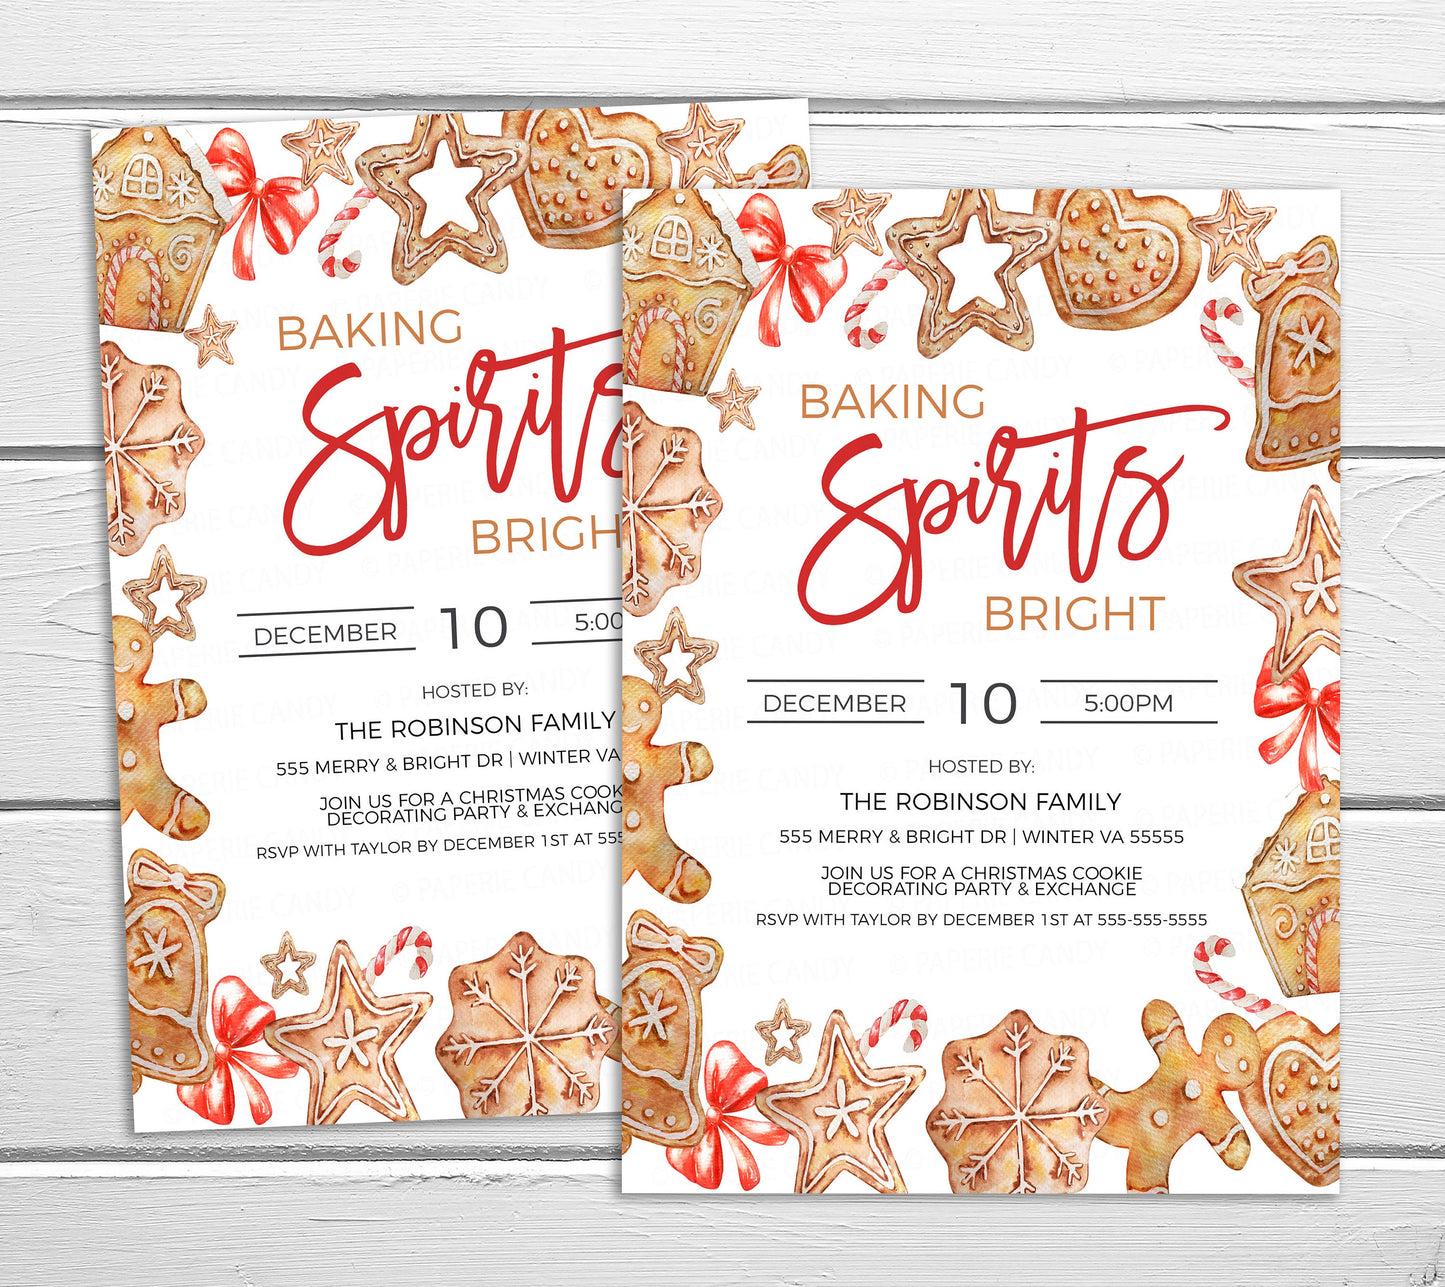 Editable Baking Spirits Bright Party Invitation, Christmas Cookie Decorating Invite, Christmas Cookie Exchange Party, Printable Template